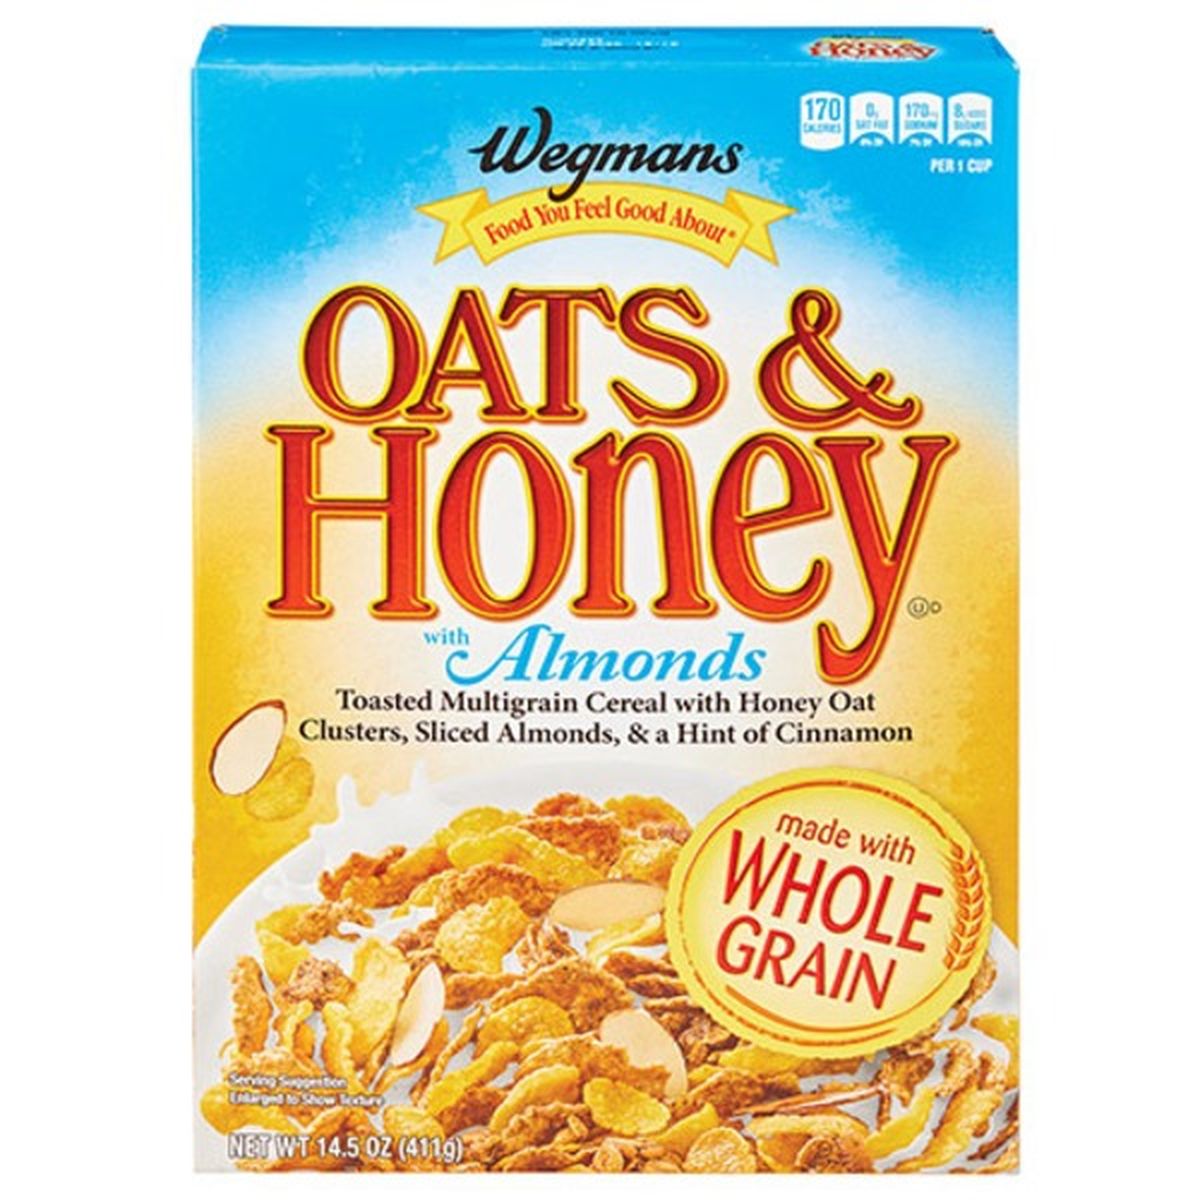 Calories in Wegmans Oats & Honey with Almonds Cereal